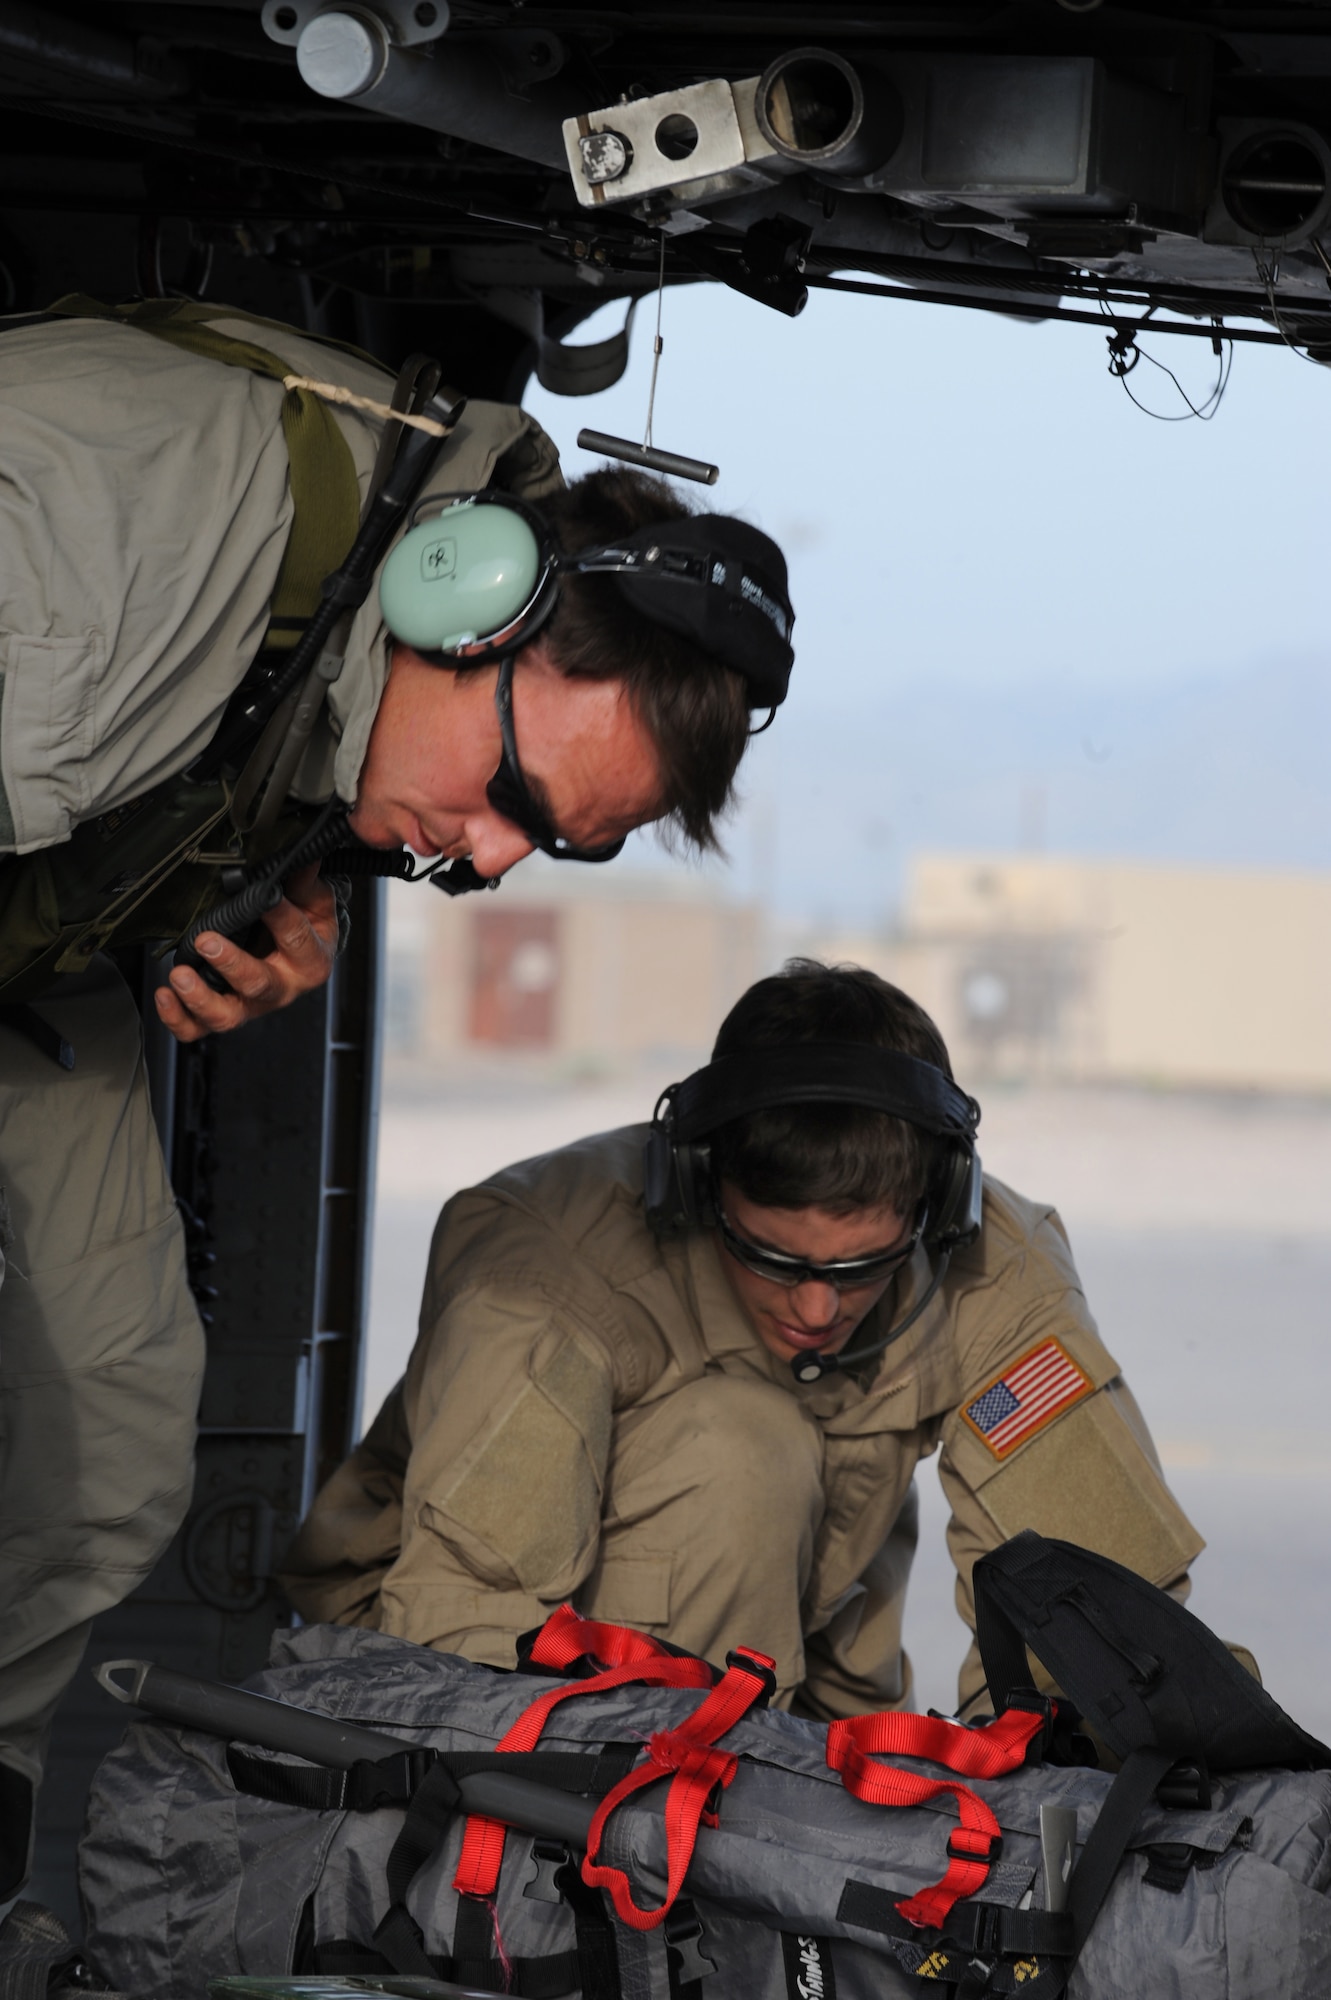 Staff Sgt. Jerry Lennon and Senior Airman David Coval inspect all equipment for discrepancies aboard HH-60G Pave Hawk prior to departing for a rescue mission May 1 at Nellis Air Force Base, Nev. Four helicopters and 24 Airmen from the 58th and 66th Rescue Squadrons deployed to assist in the search for a pilot and passenger who were aboard a motorized sailplane that disappeared from radar April 24 in the Sierra Nevada Mountain Range near Mammoth Lakes, Calif.Sergeant Lenon and Airman coval are pararescuemen with the 58th Rescue Squadron. (U.S. Air Force photo/Senior Airman Nadine Y. Barclay) 
